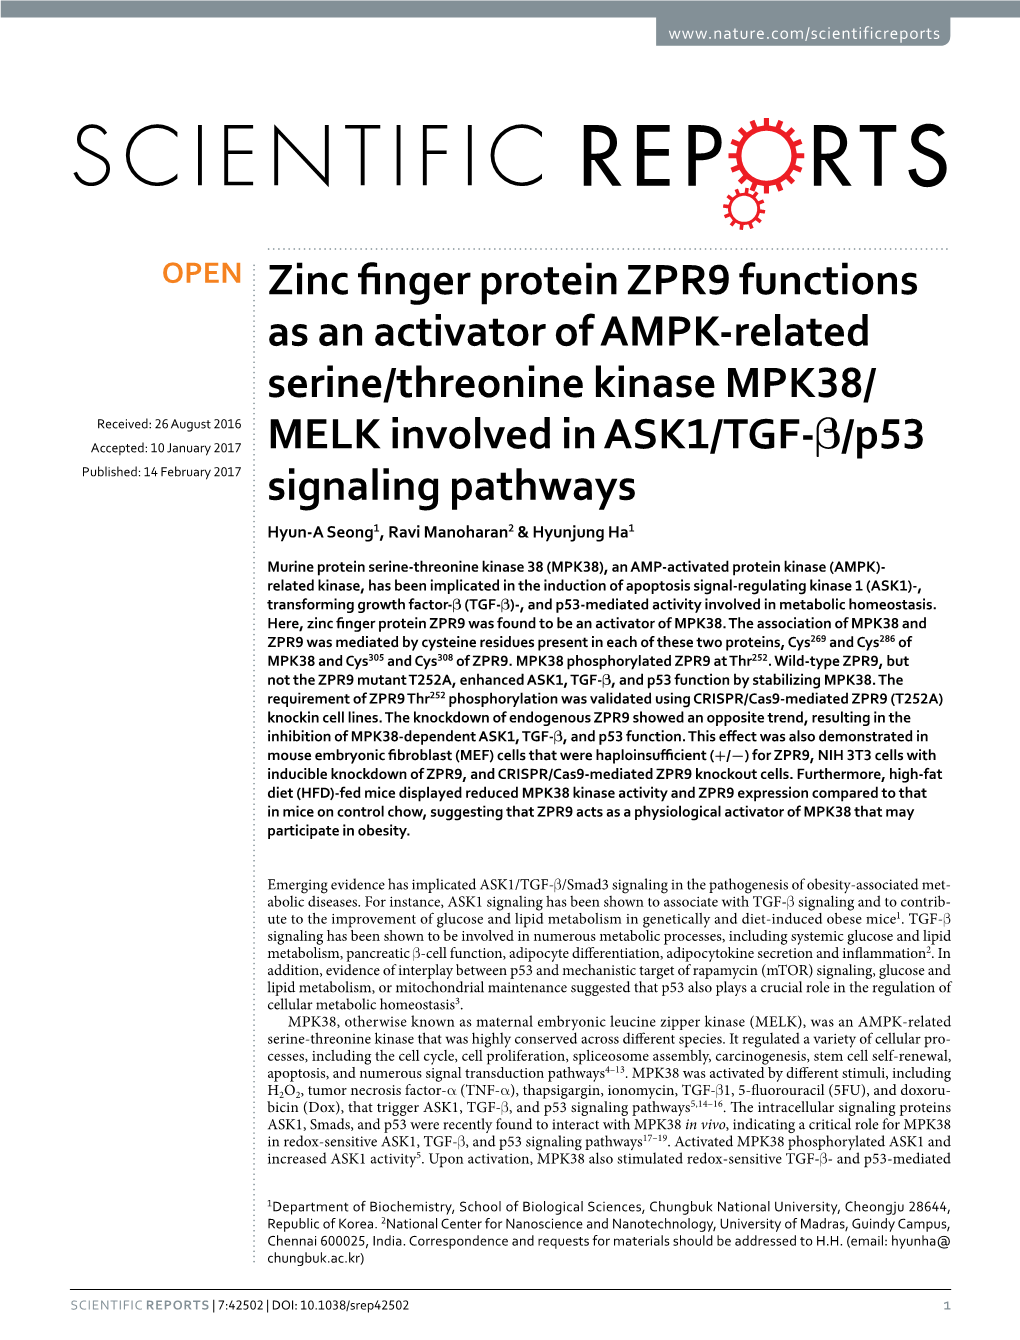 Zinc Finger Protein ZPR9 Functions As an Activator of AMPK-Related Serine